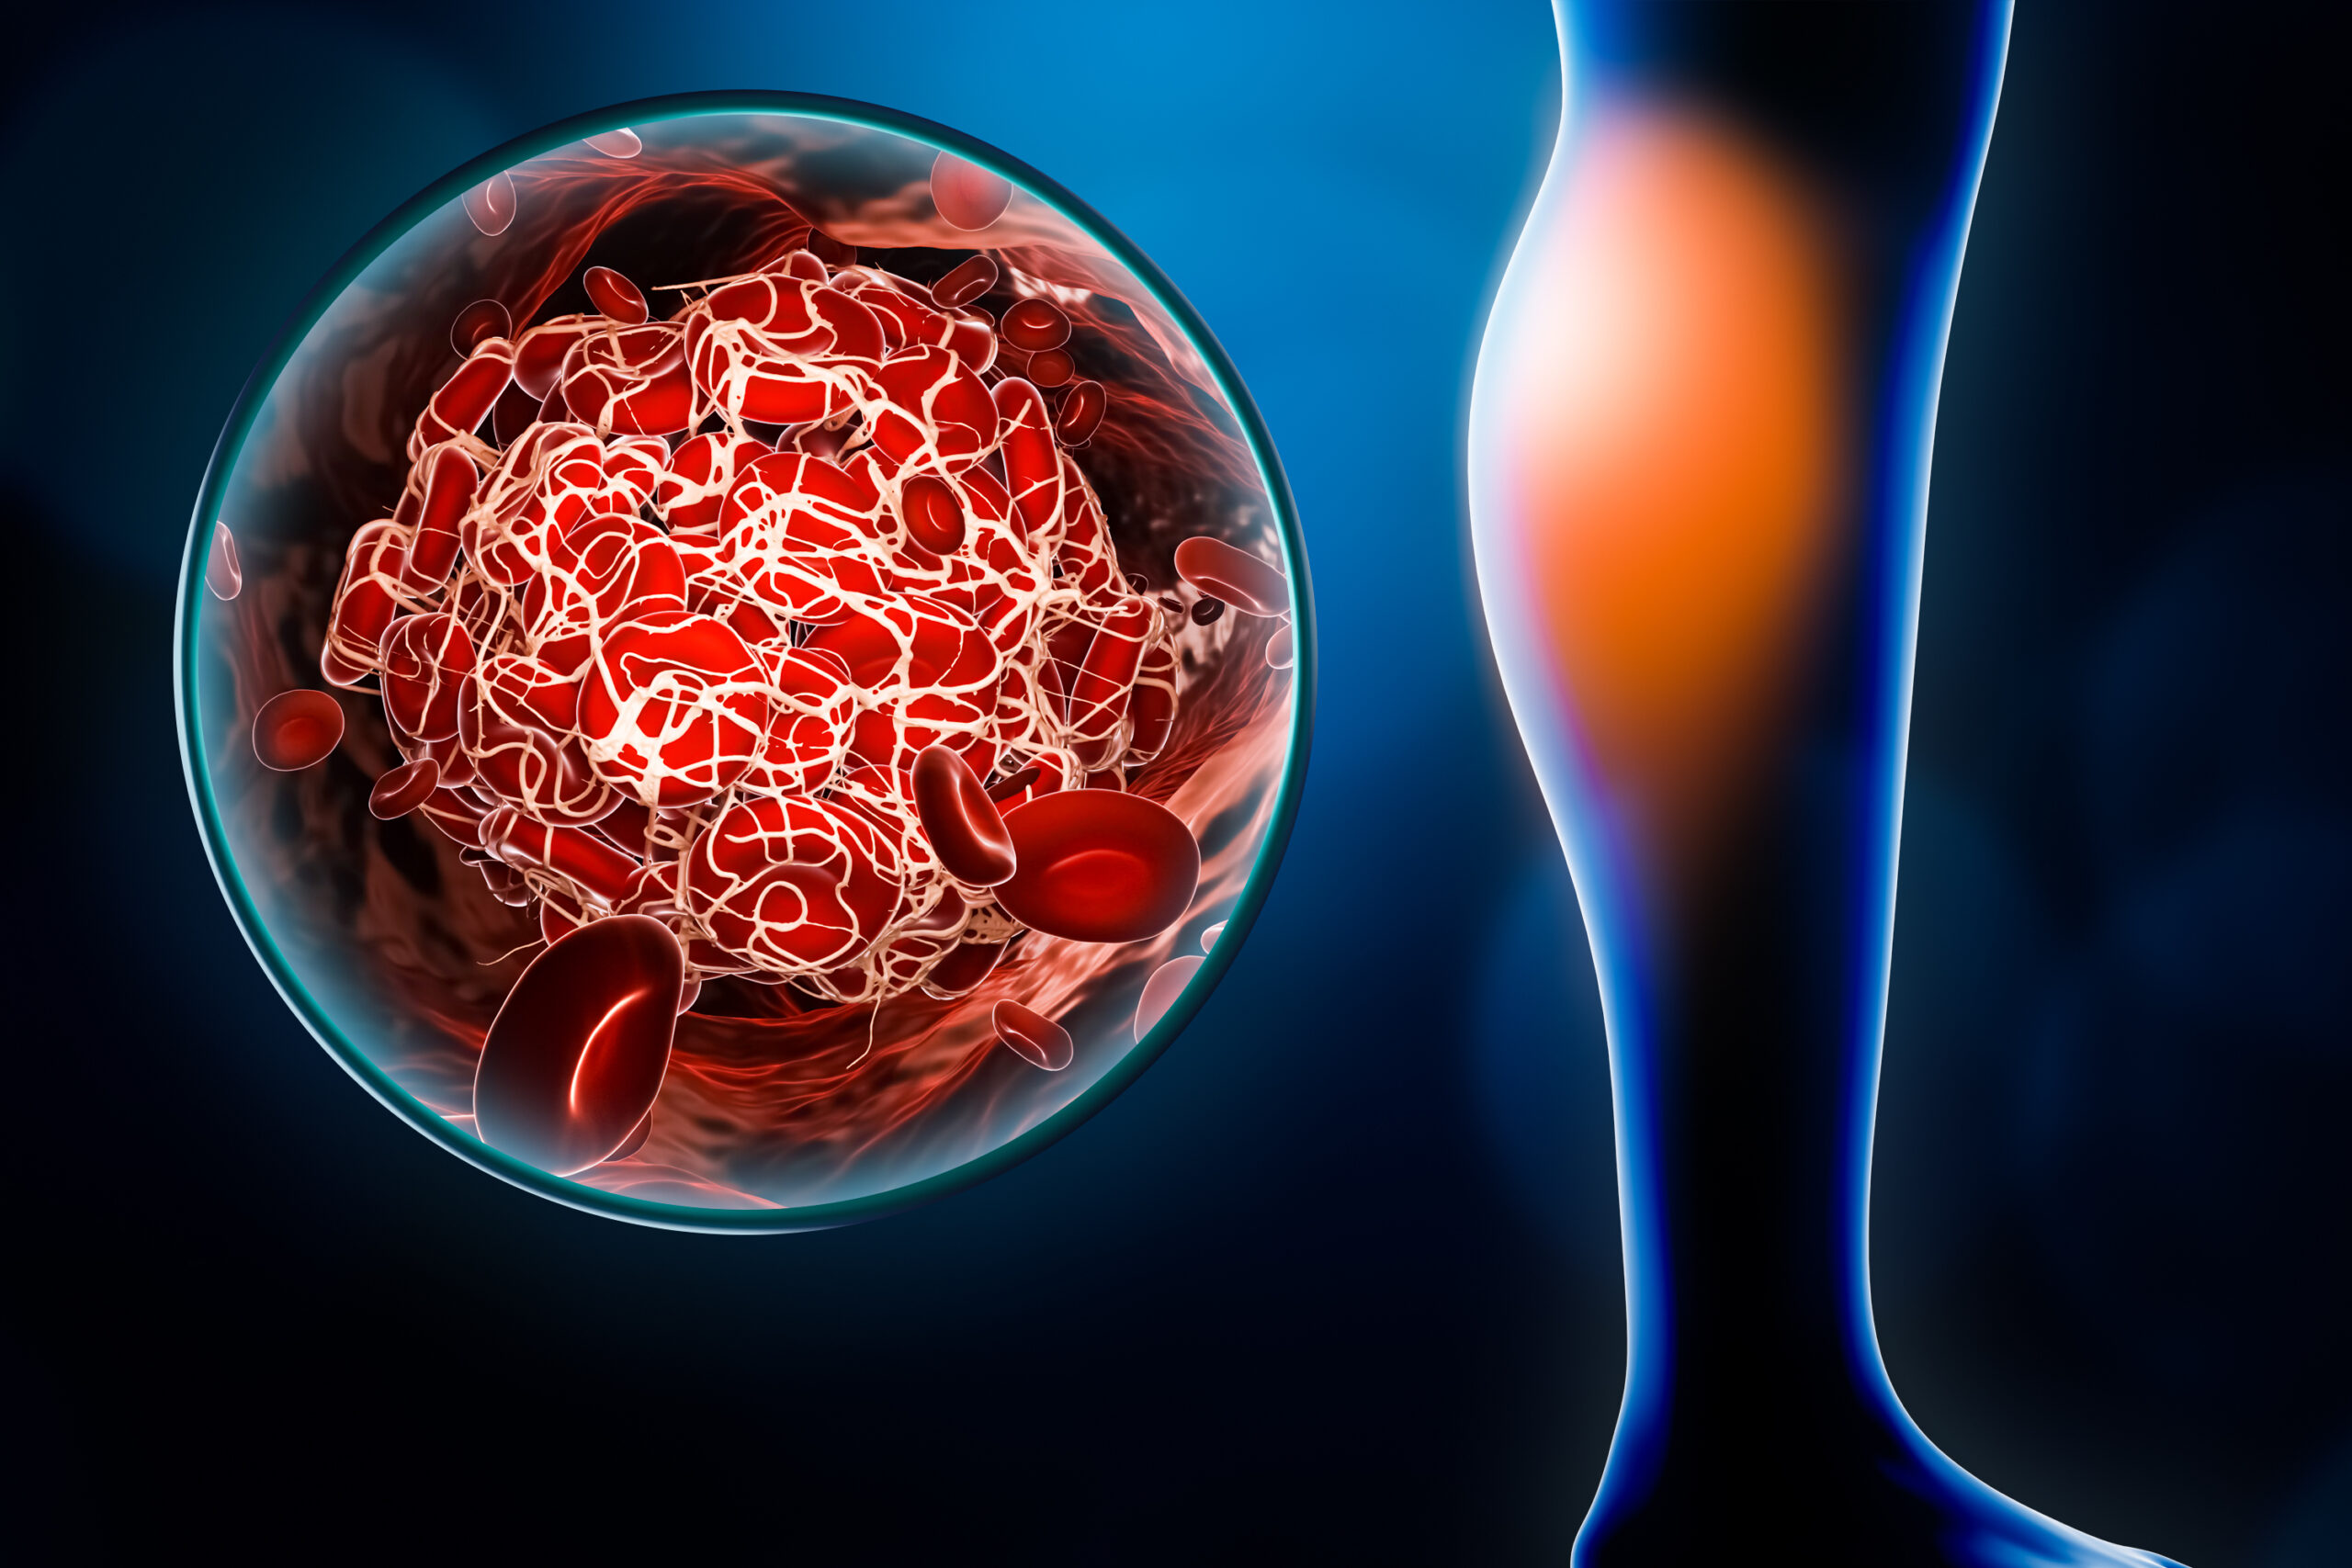 An illustration of a blood clot forming and causing pain in the lower extremities.